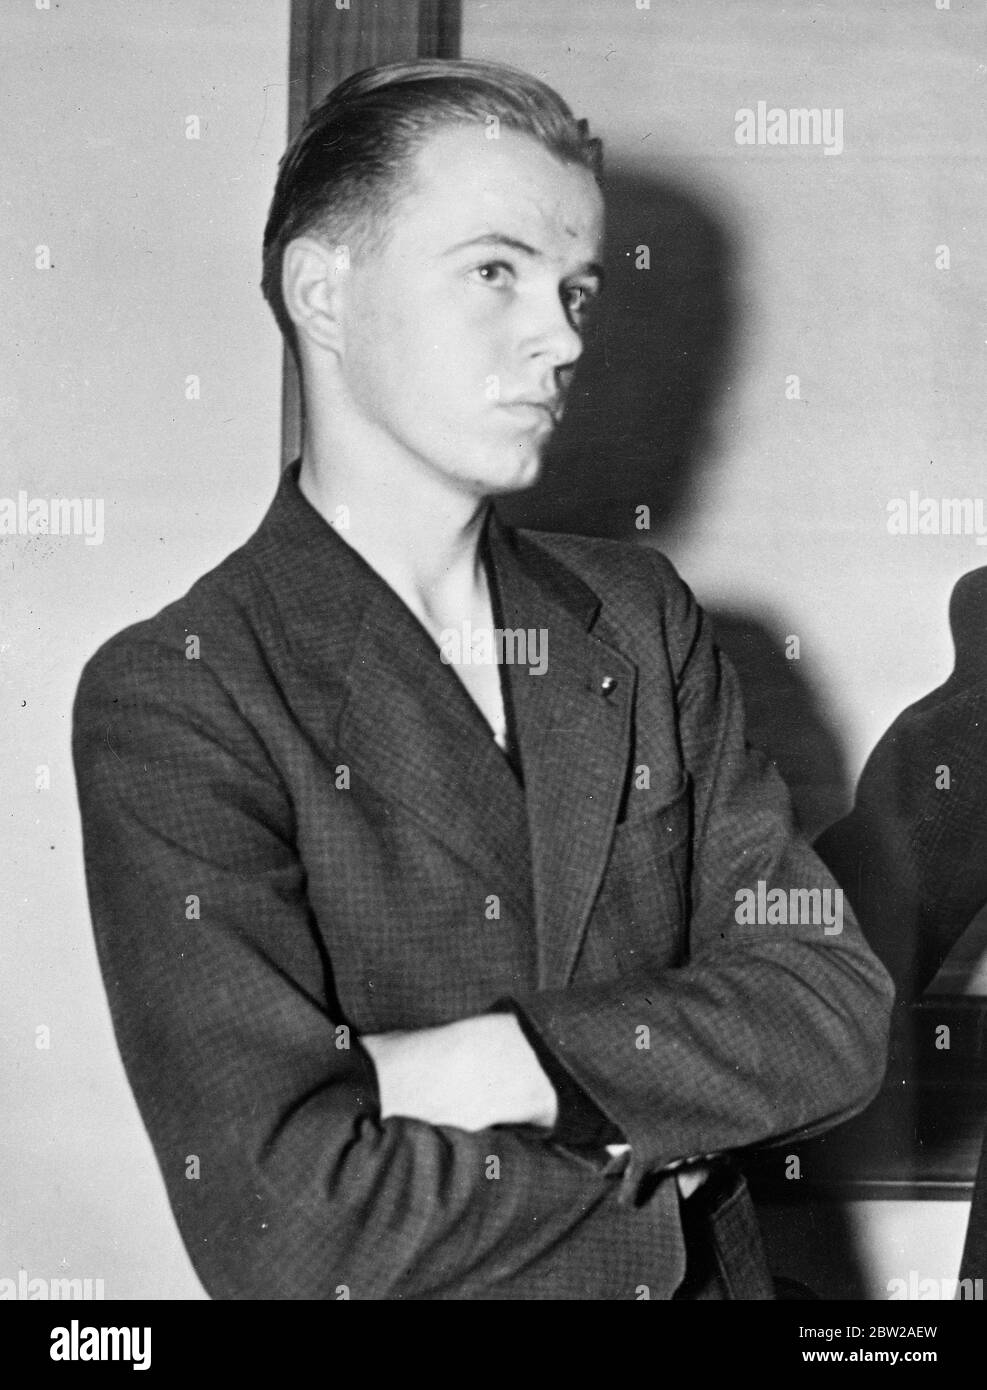 Boy of 18 confesses to murdering couple with hammer. Talking disconnectedly, Paul Dwyer, 18-year-old chauffeur, confessed to the police at North Arlington, New Jersey, that he had committed a fantastic double hammer murder, which cost the lives of Dr J G Littlefield, an orderly physician, of South Paris, Maine, and Mrs Littlefield. The police said Dwyer was apparently motivated by the need for money, although the murders netted him less than Â£60. Dwyer, part-time chauffeur to the littlefields told the police that he killed the couple in South Paris, stuffed their bodies into the car and drove Stock Photo